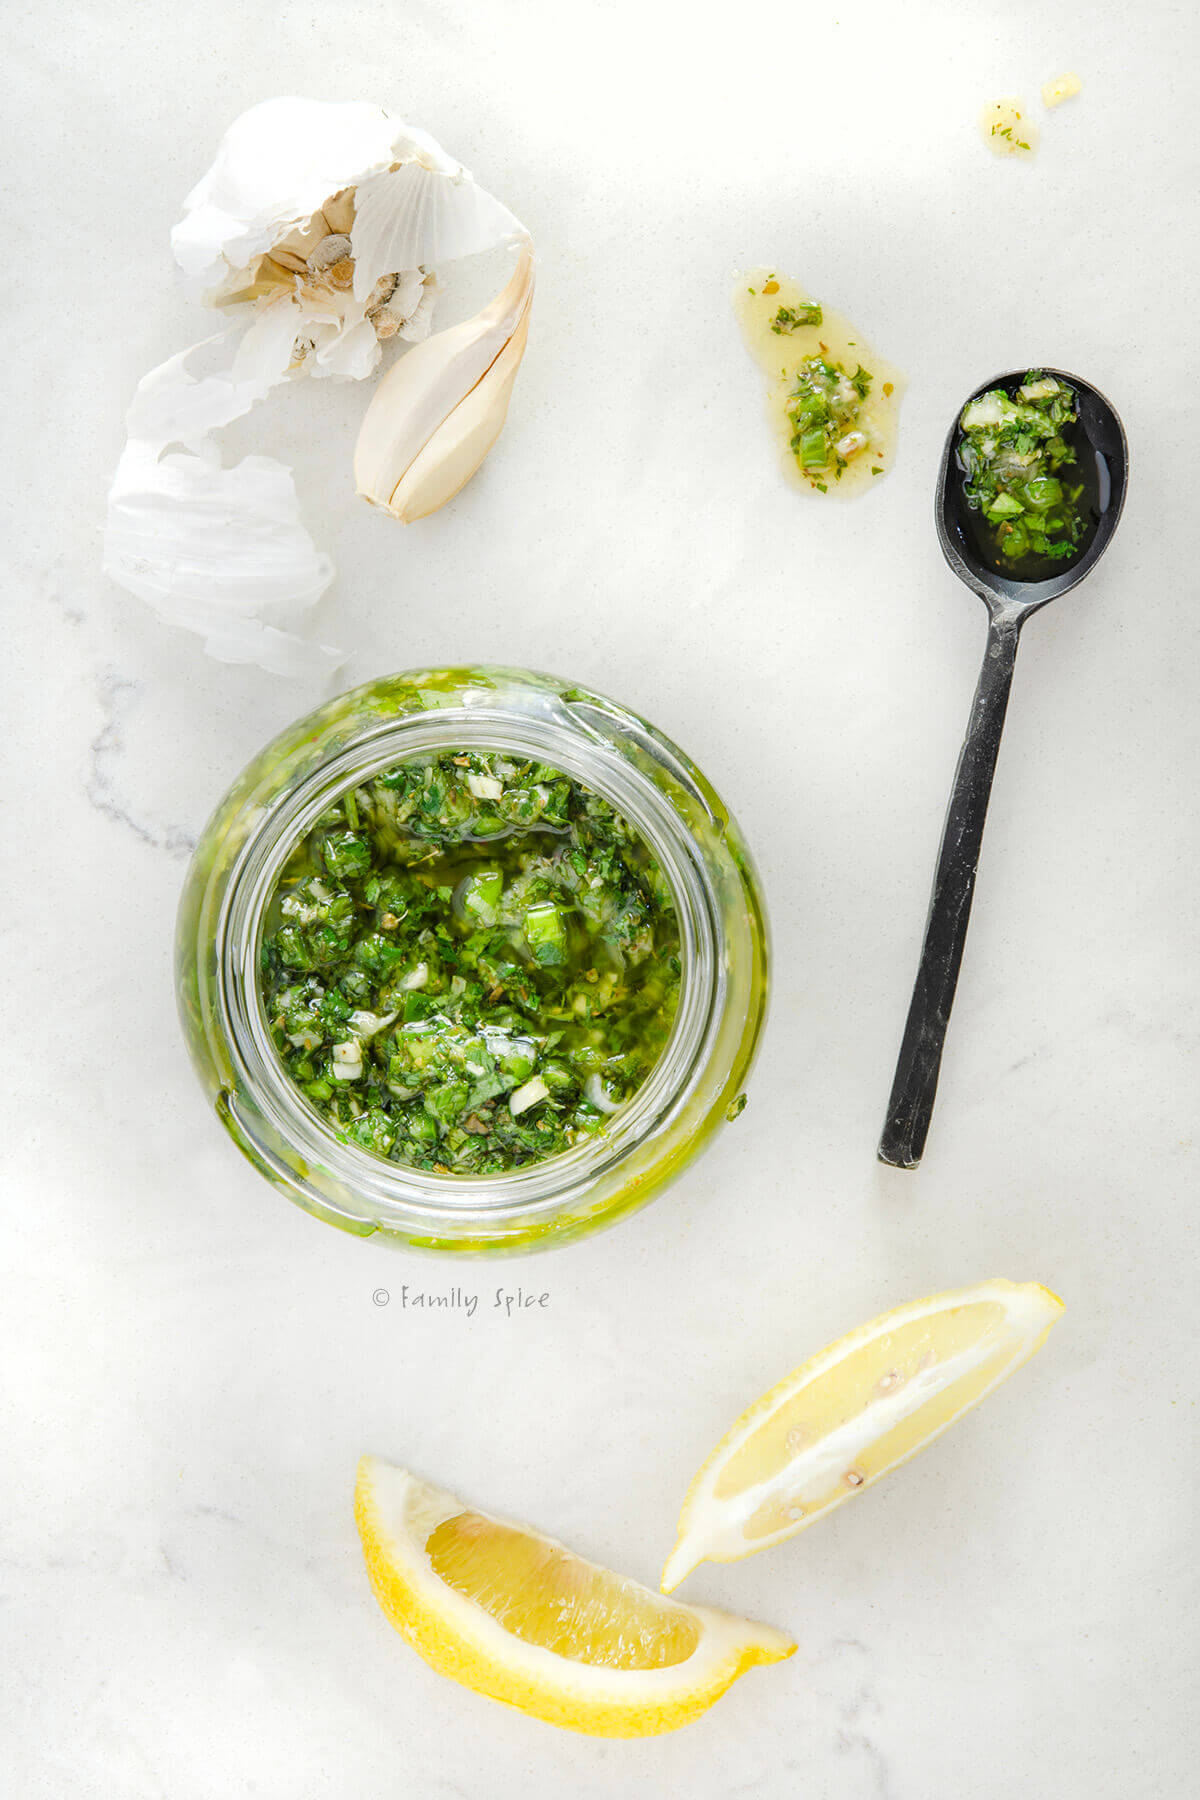 Top view of a jar of cilantro chimichurri with a metal spoon, lemon wedges and garlic next to it